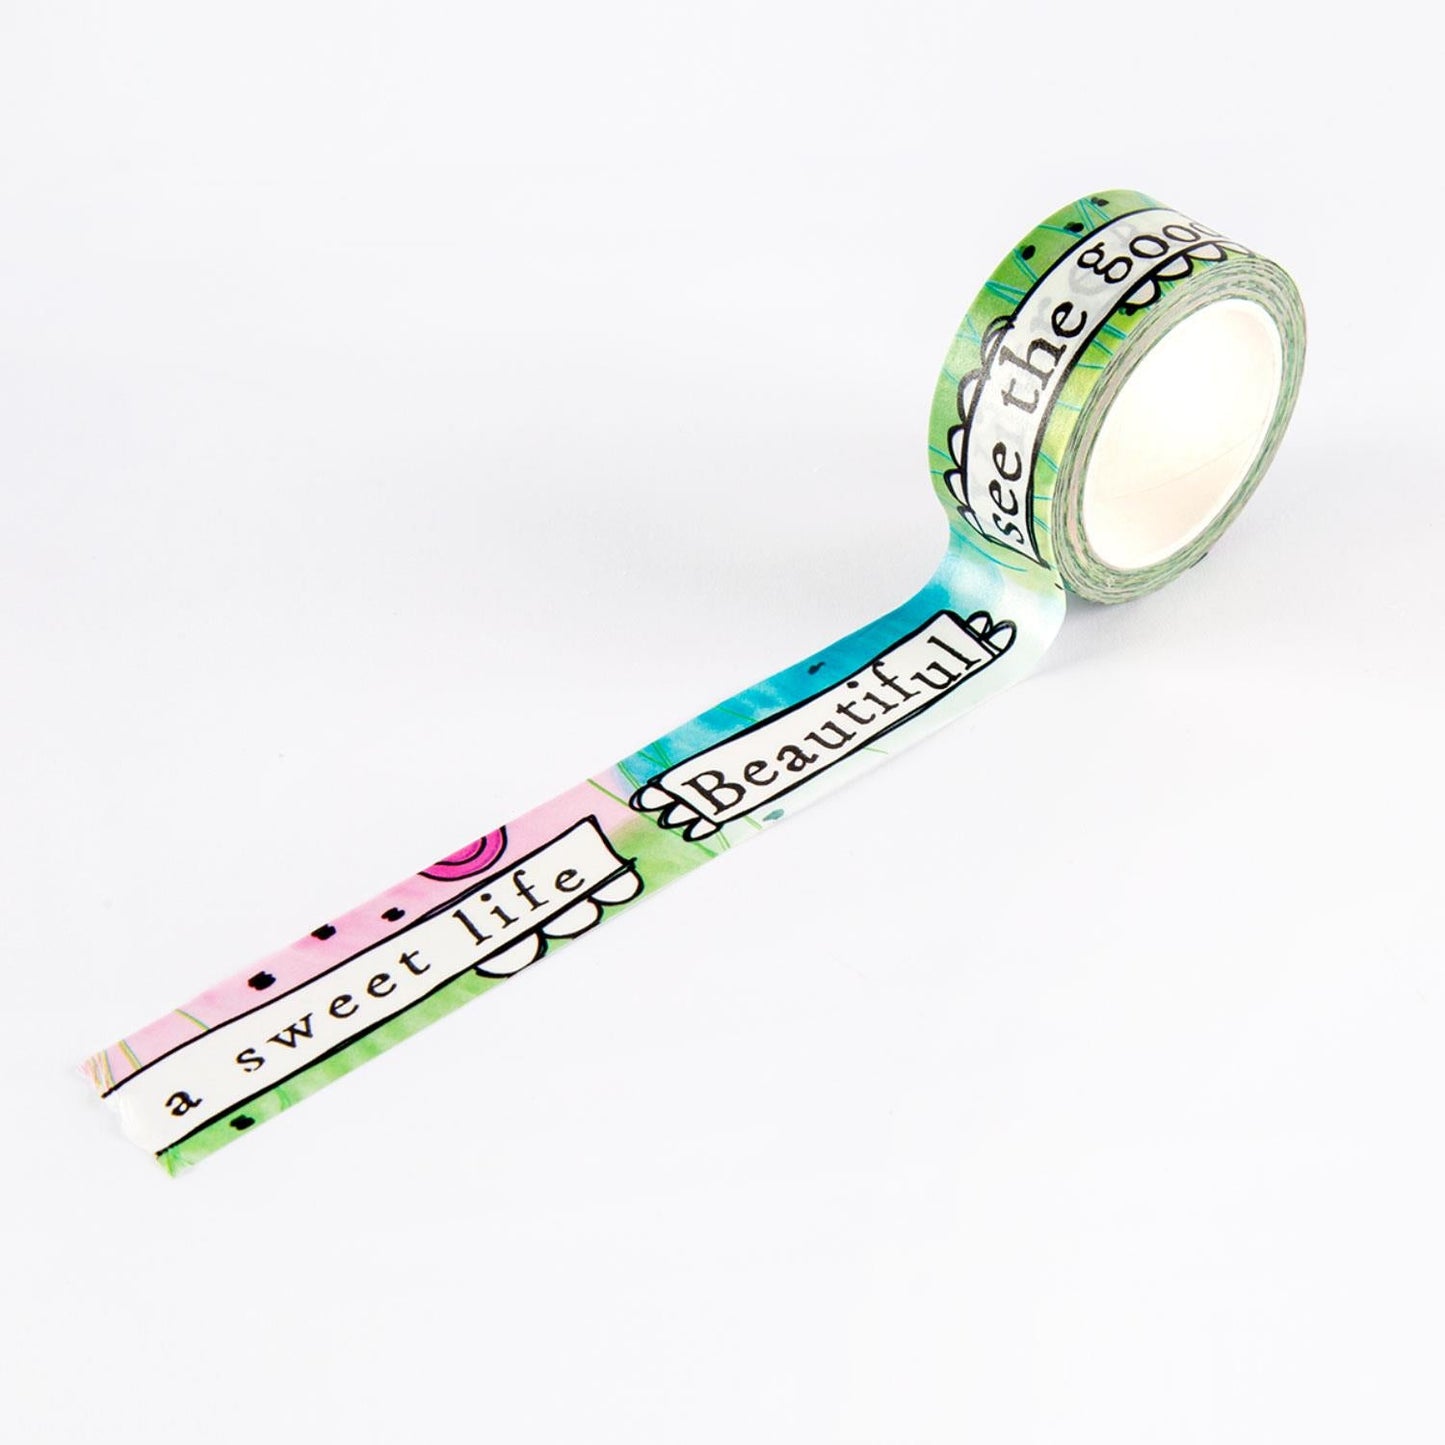 Aall and Create - Washi Tape - Vivre - #23 - Janet Klein Aall & Create